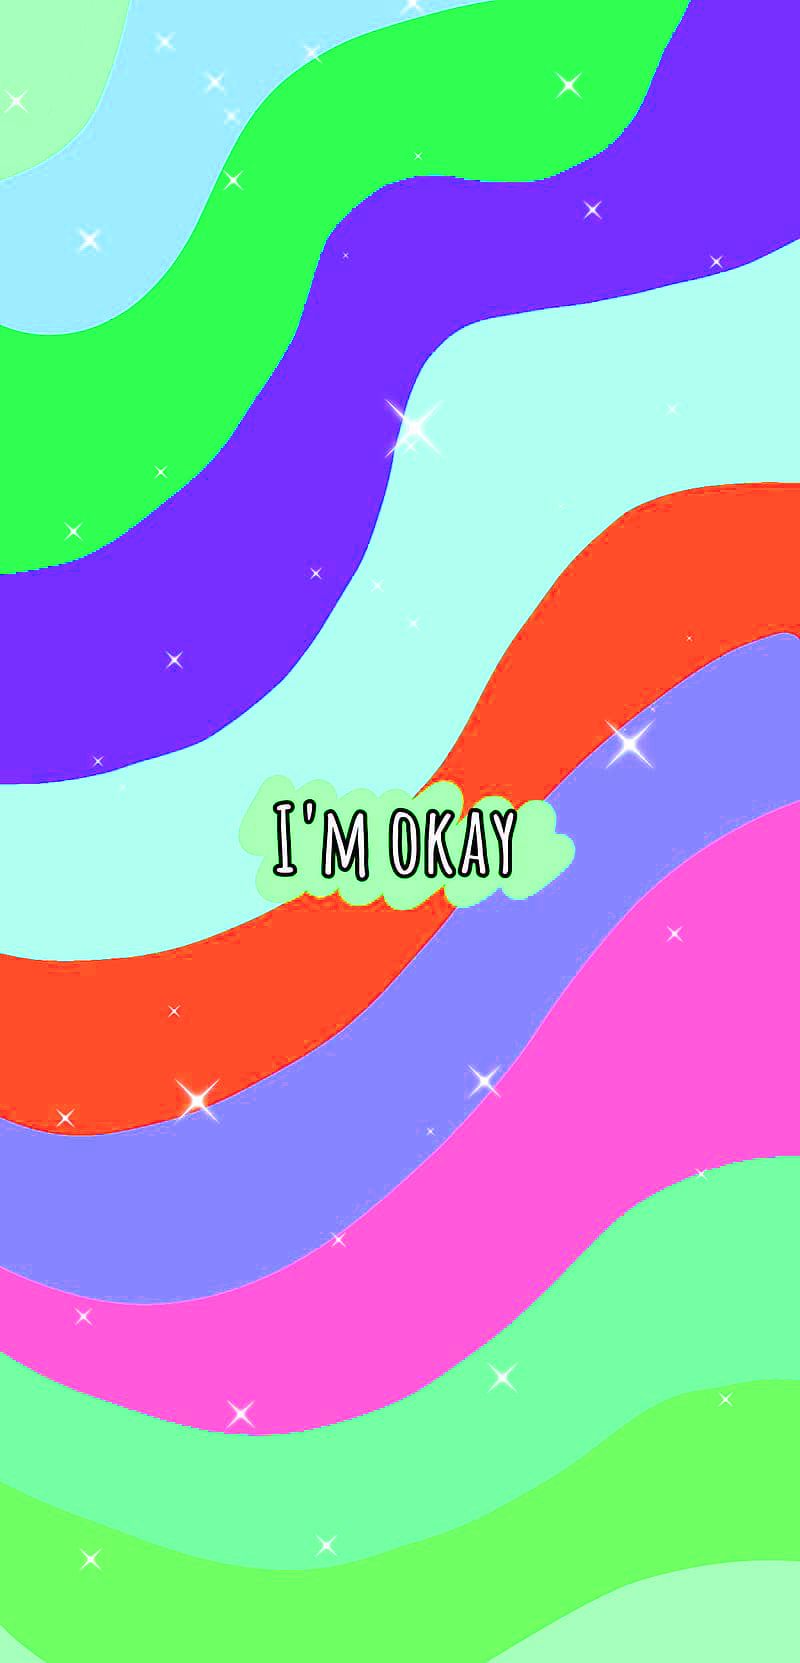 Colorful wave indie wallpaper phone background with text - Indie